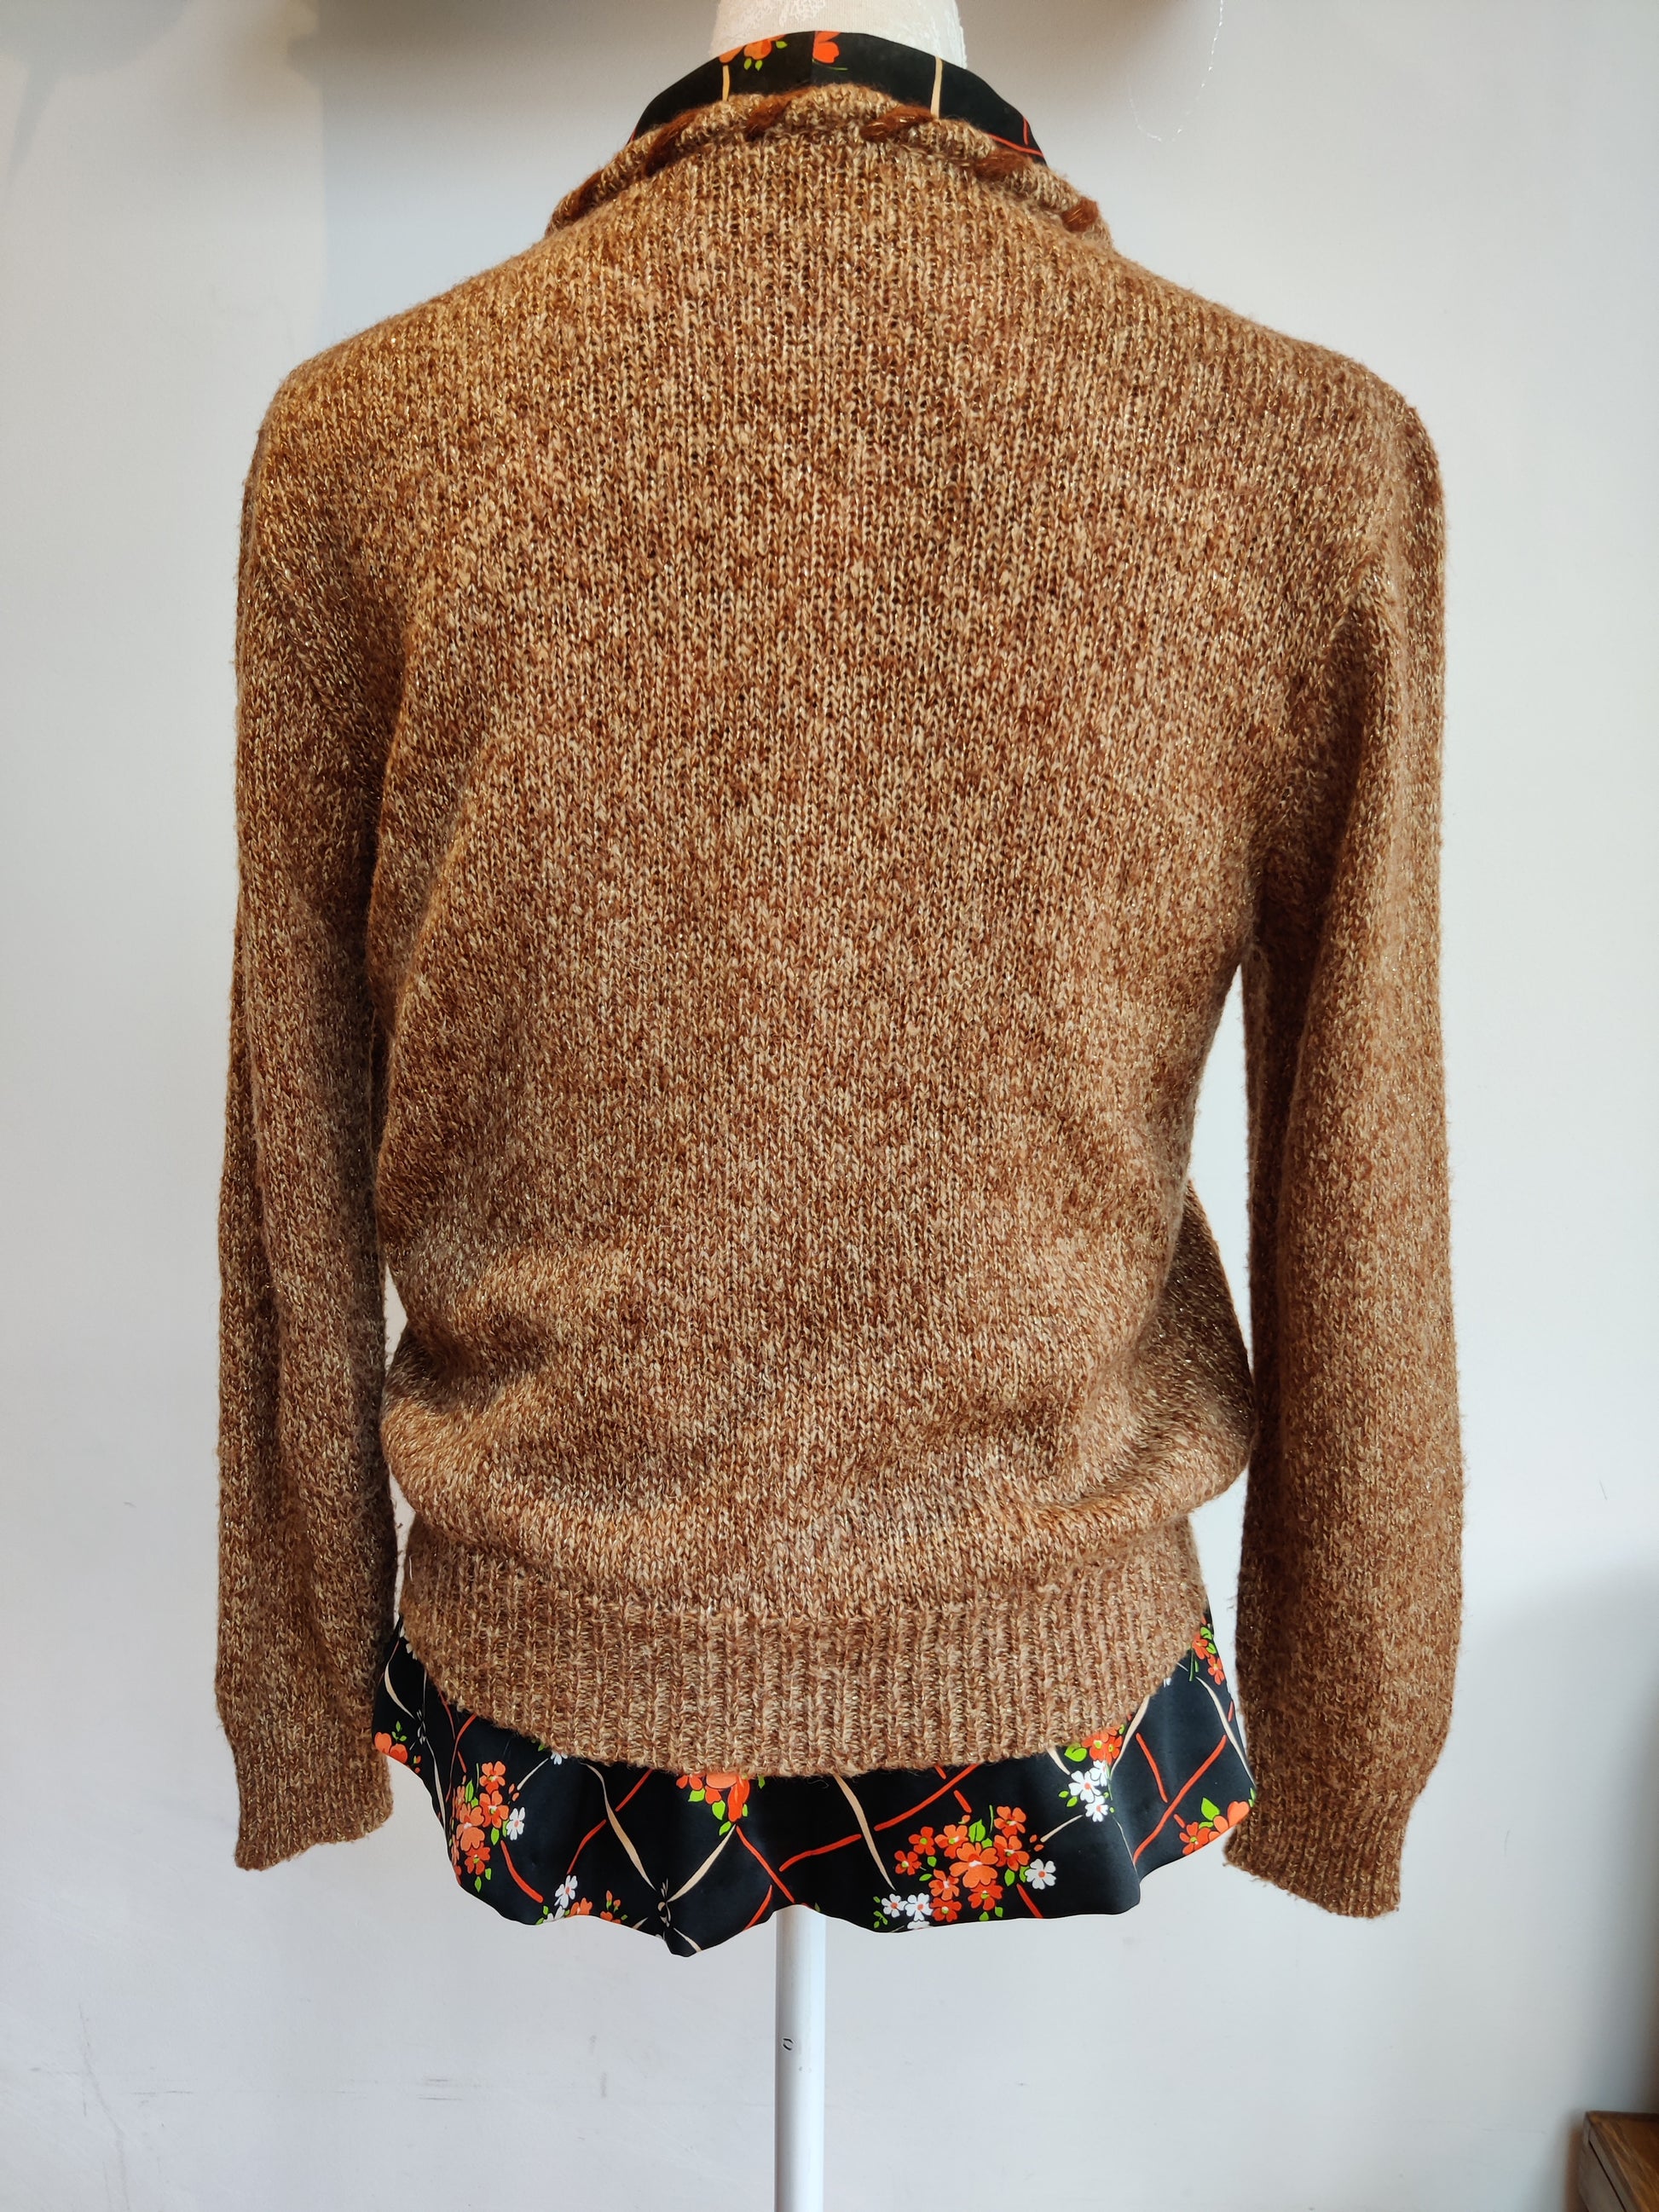 Lovely vintage Windsmoor jumper with gold thread.